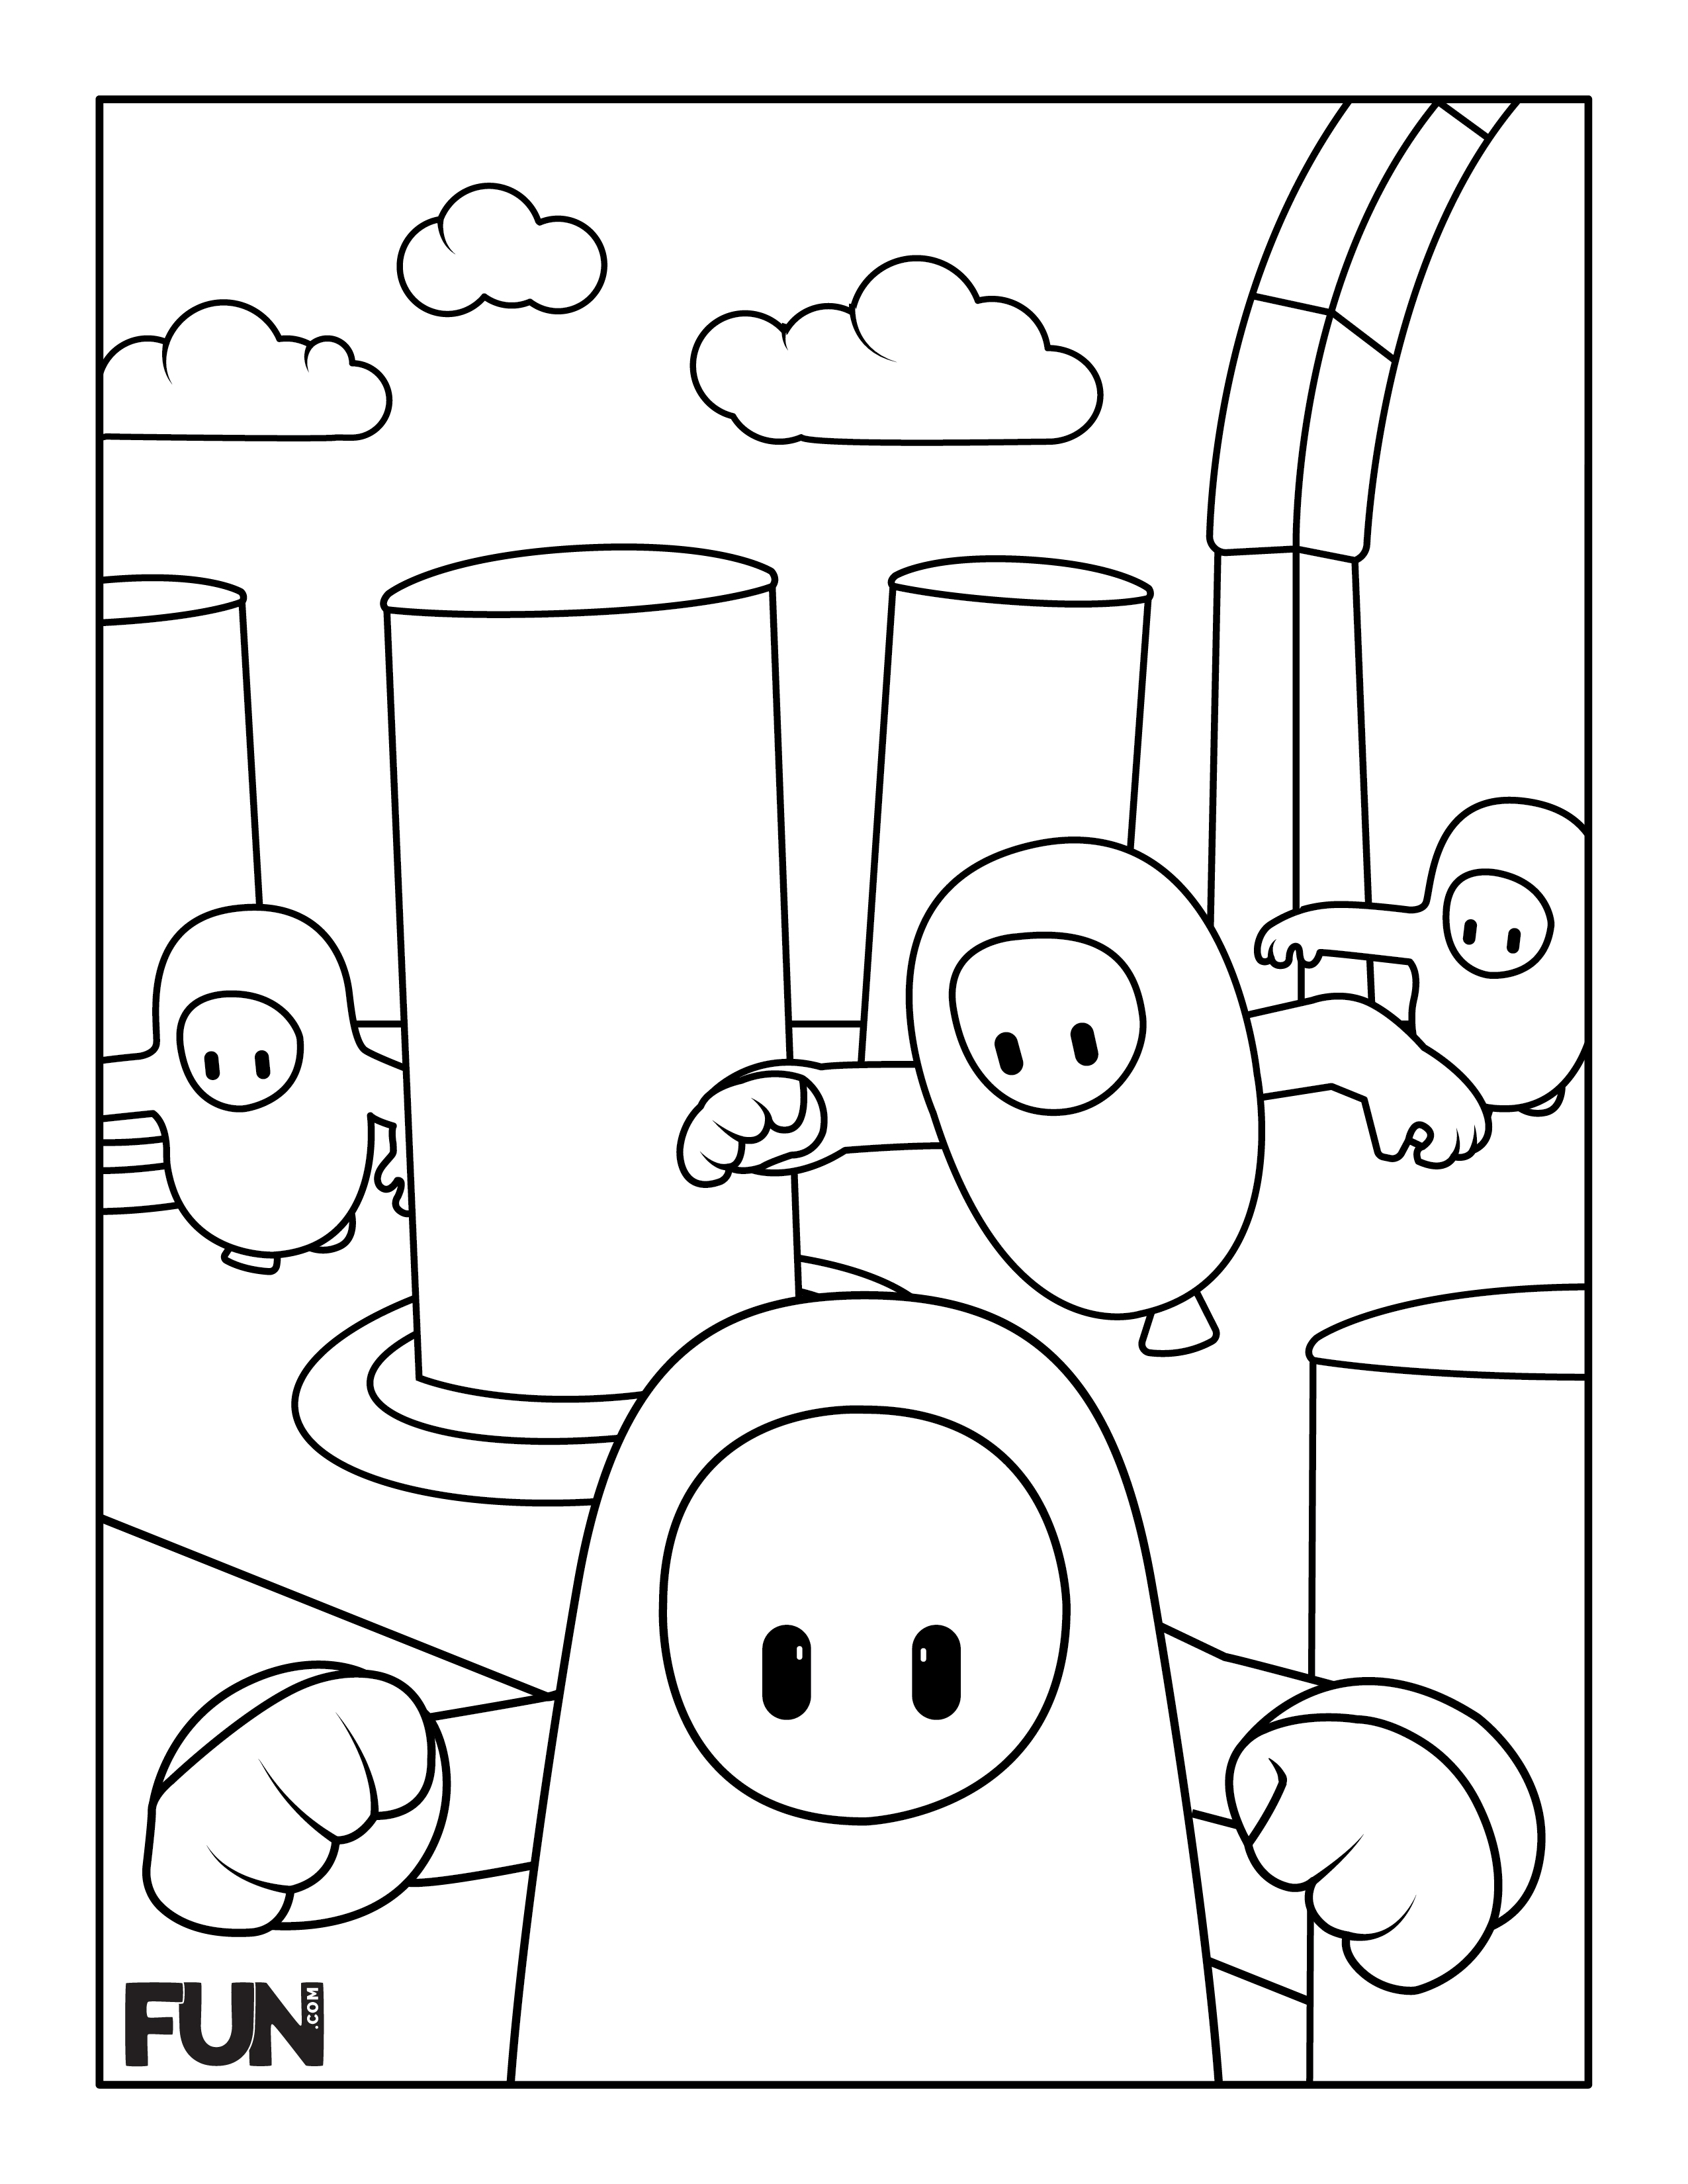 Fall Guys coloring page